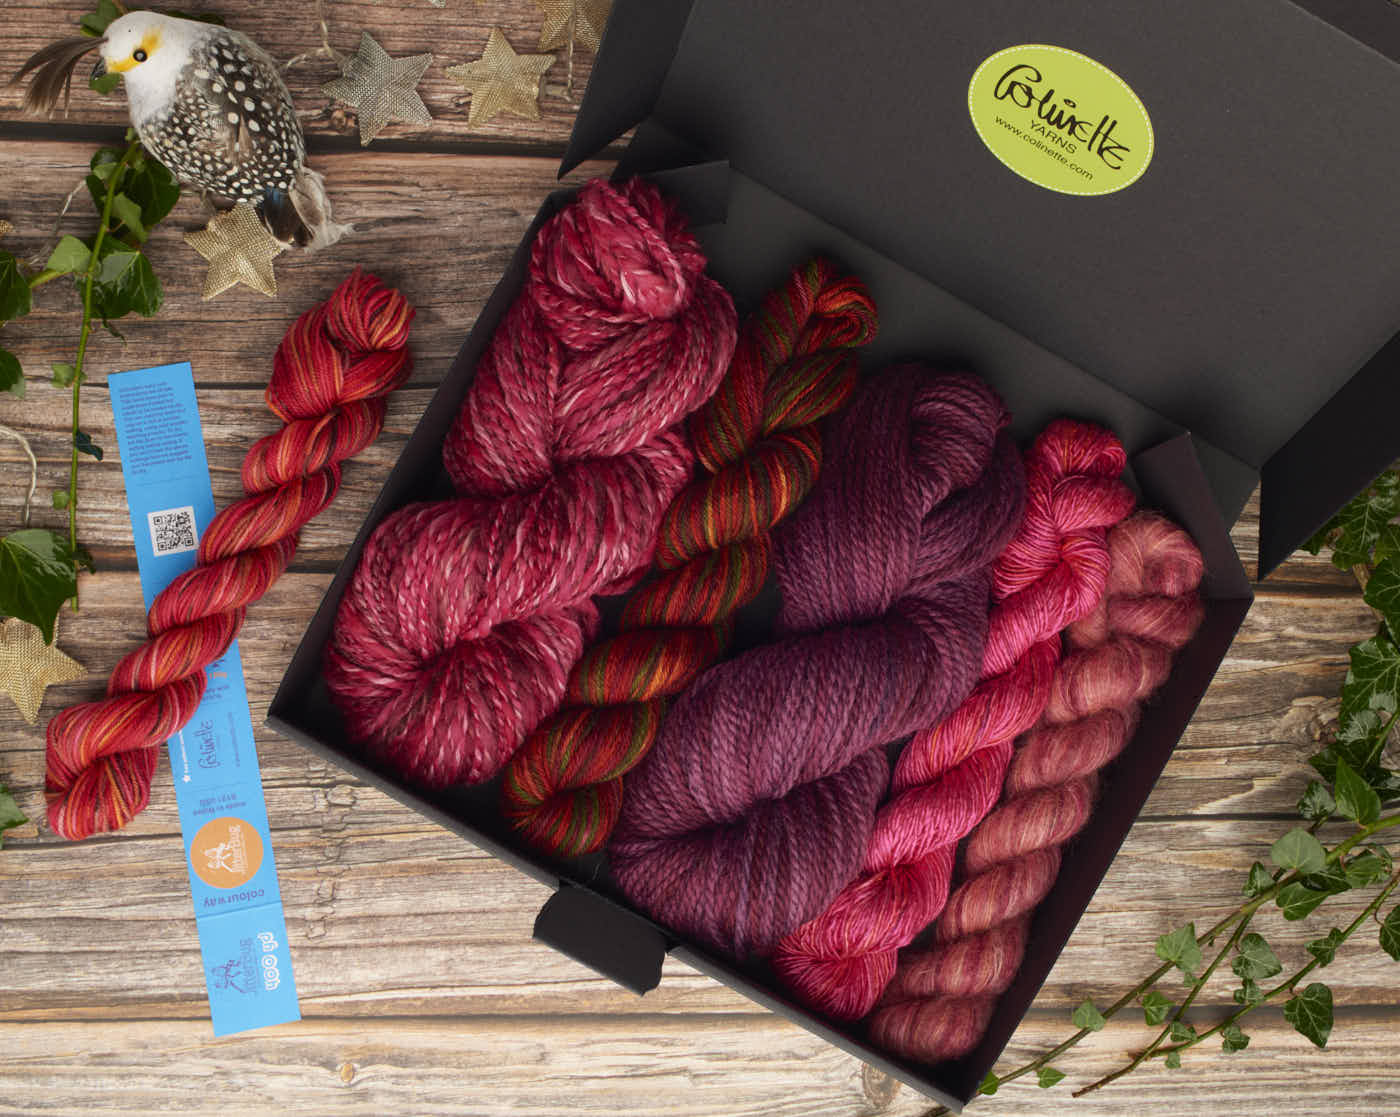 colinette yarns hand dyed yarn Christmas boxes shades red